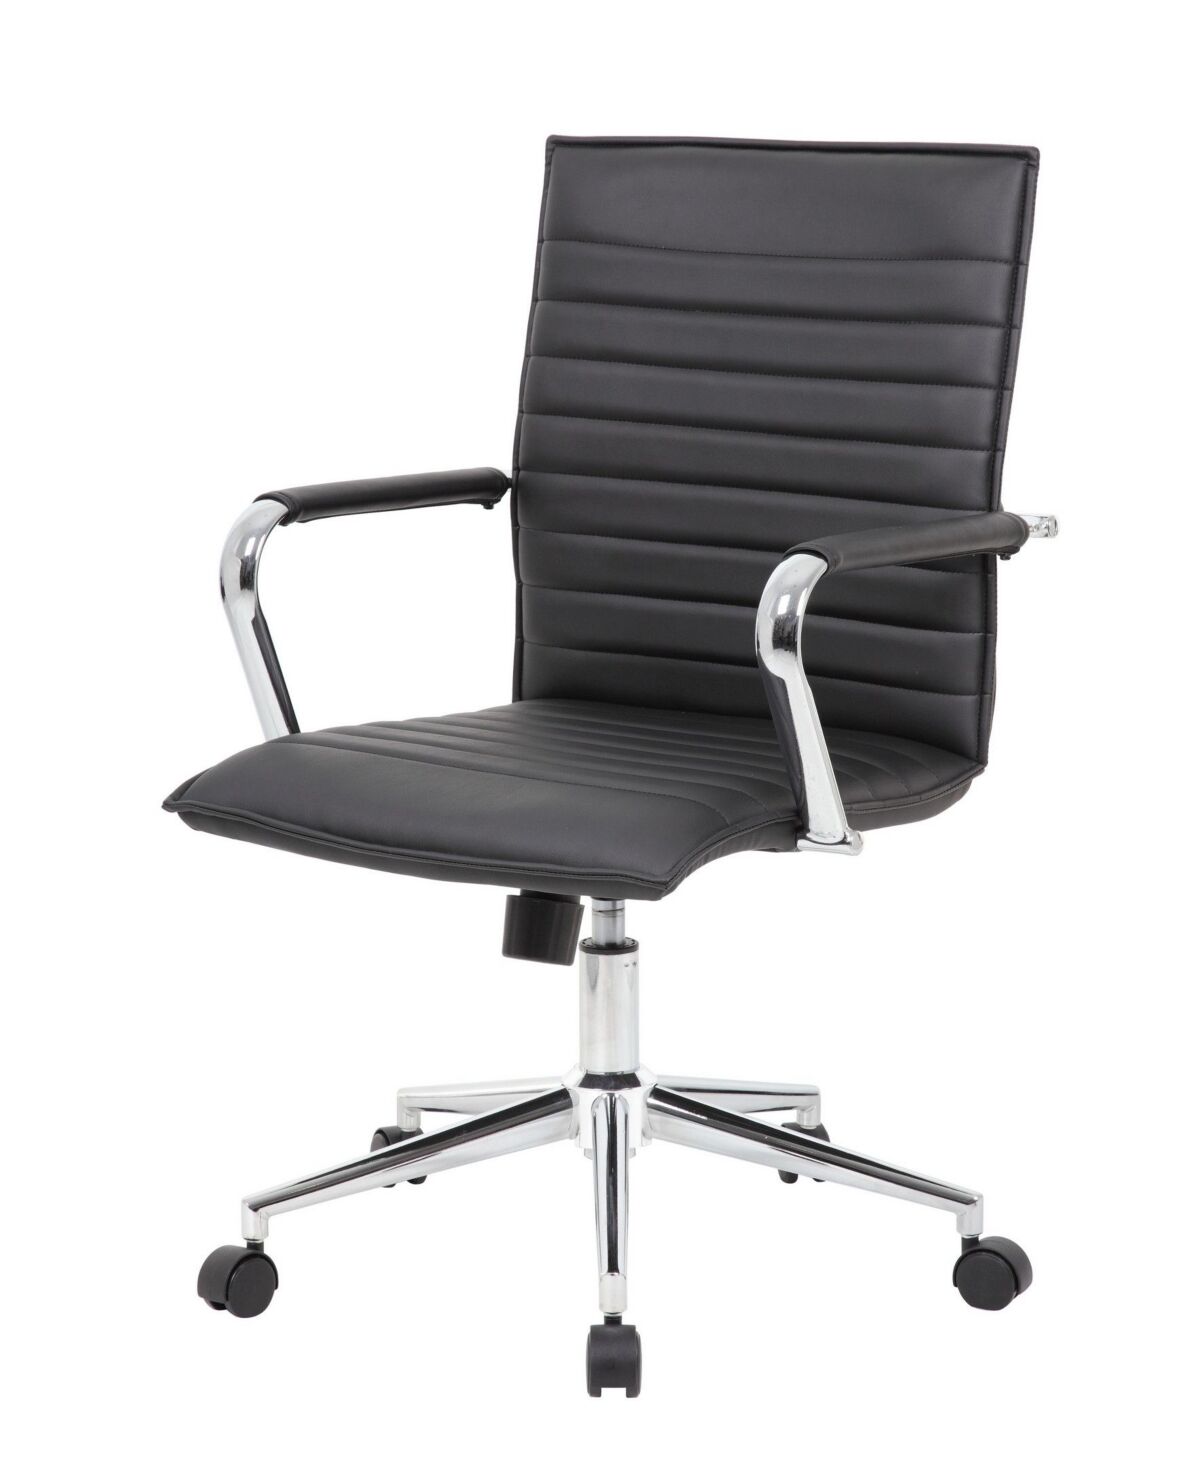 Boss Office Products Hospitality Chair - Black